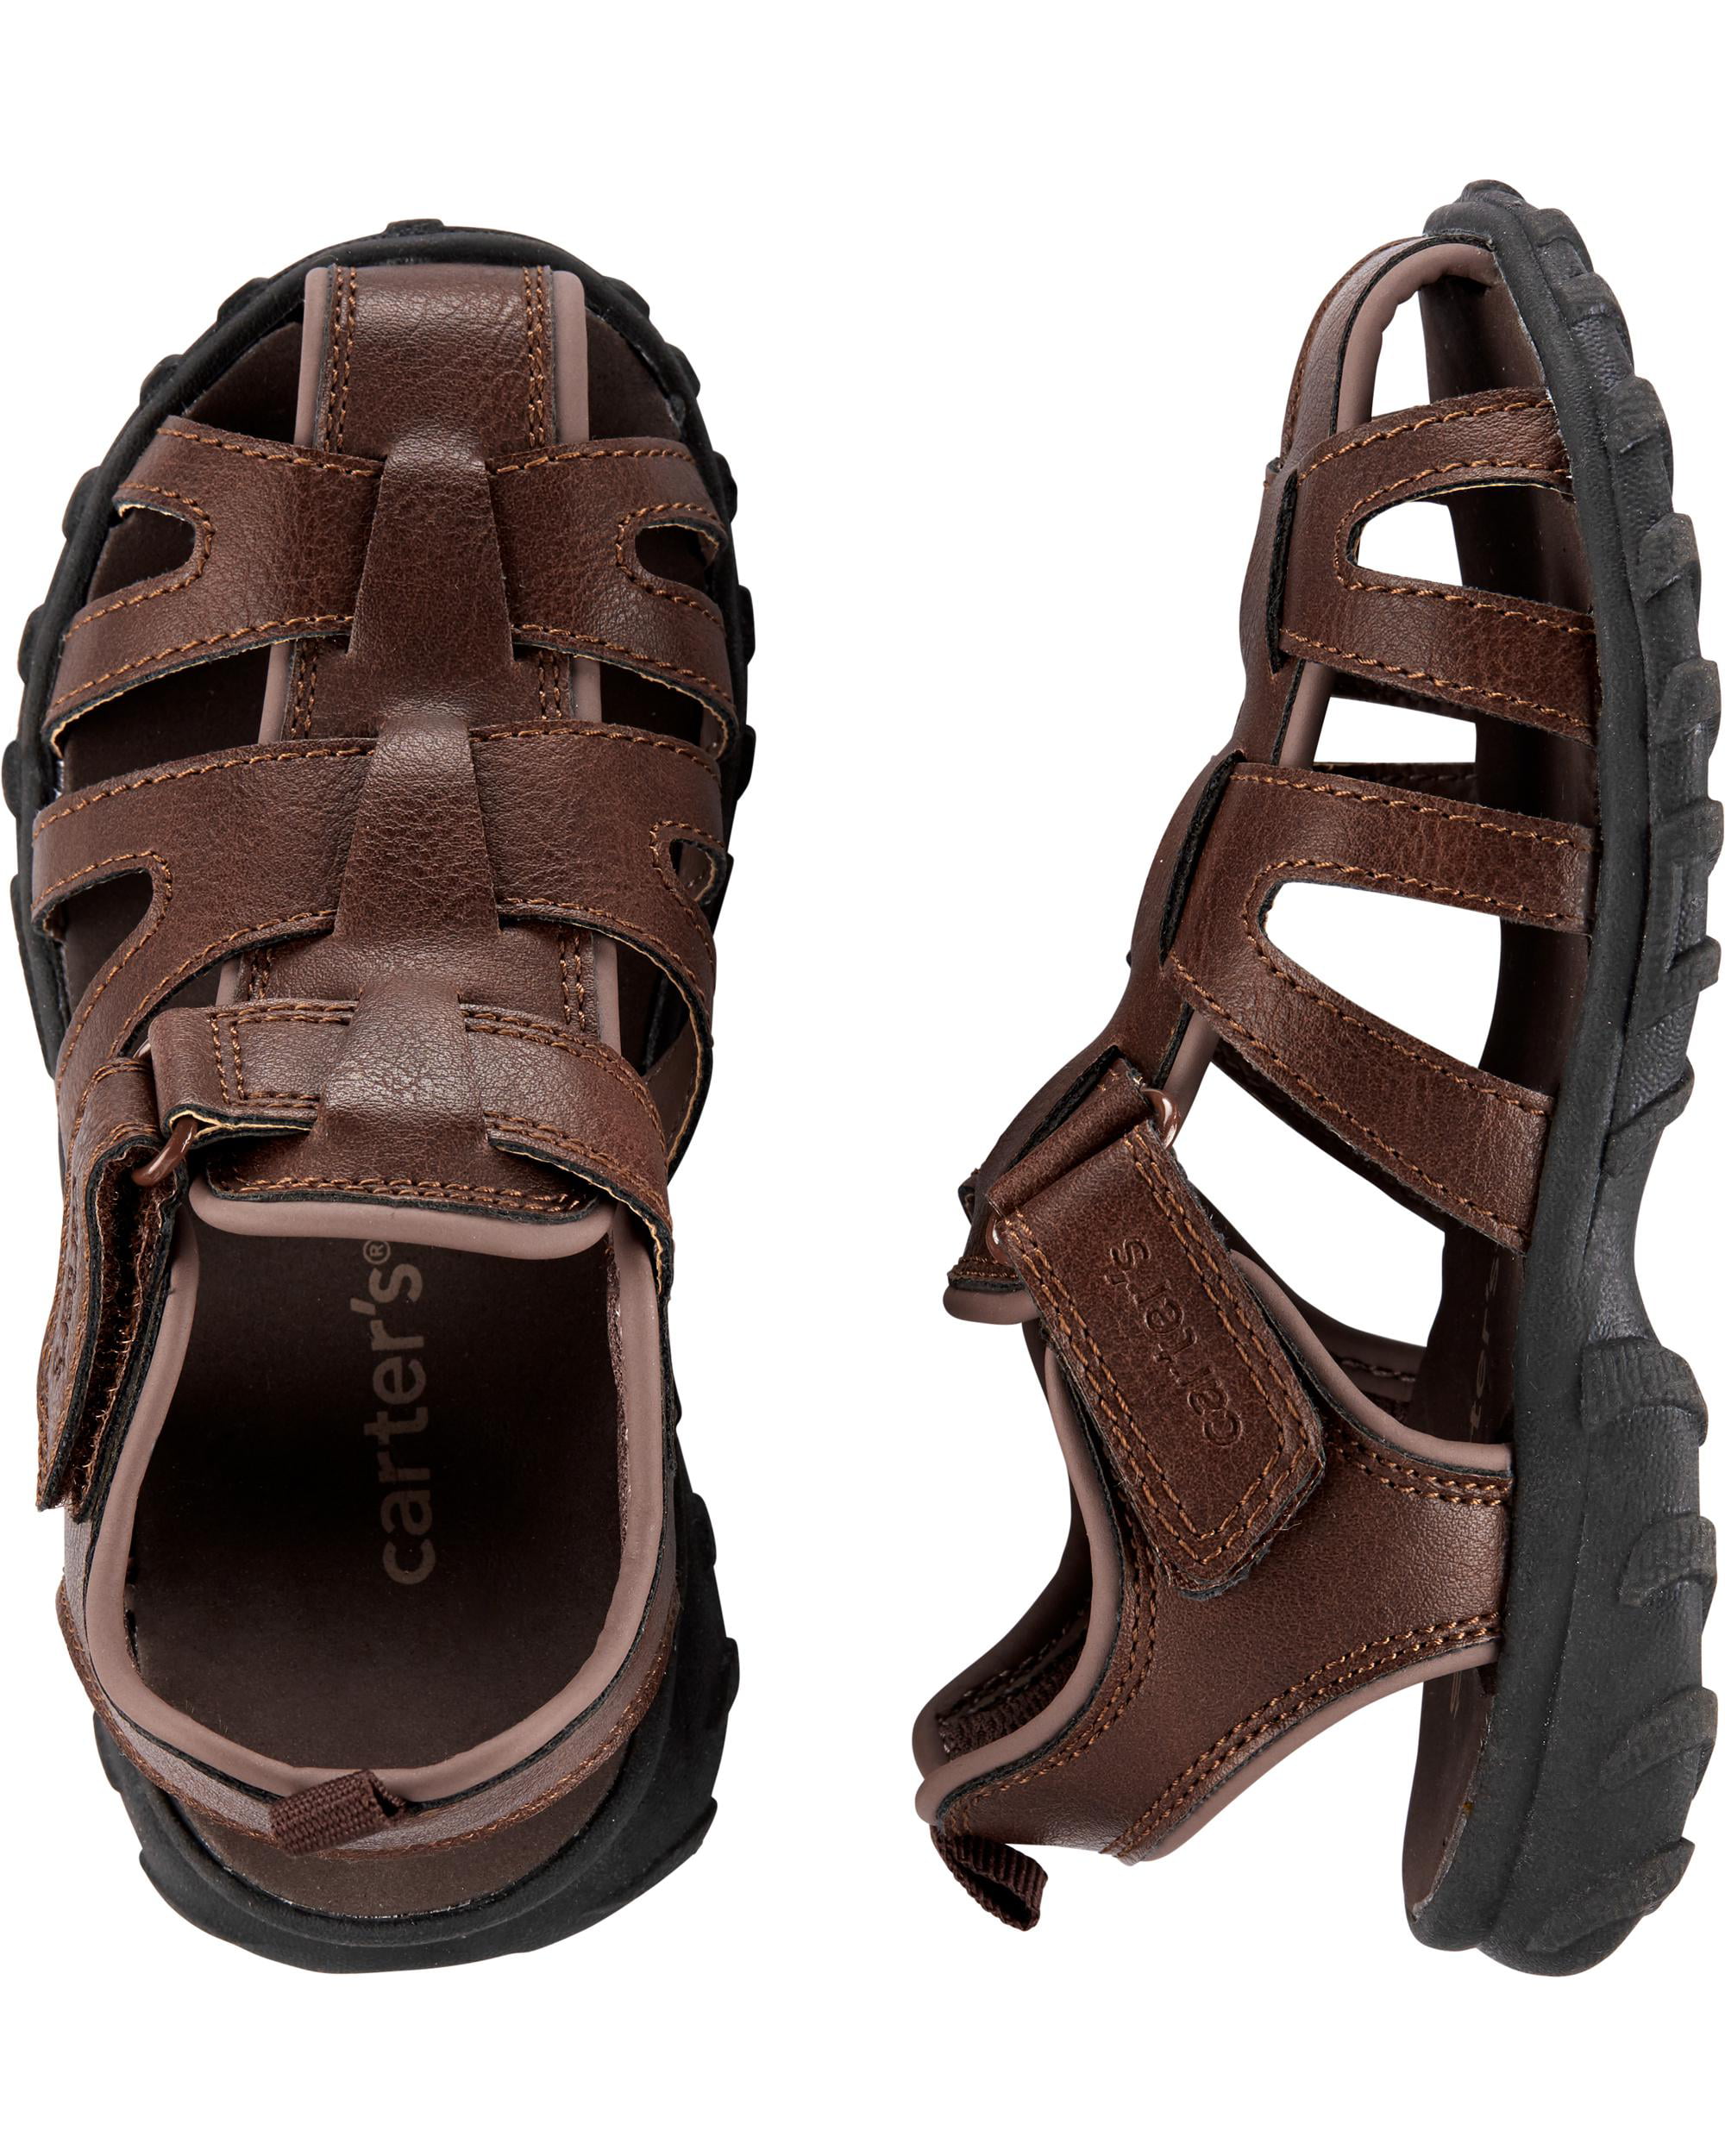 Carter's Toddler Boys Casual Sandals Summer Brown New 